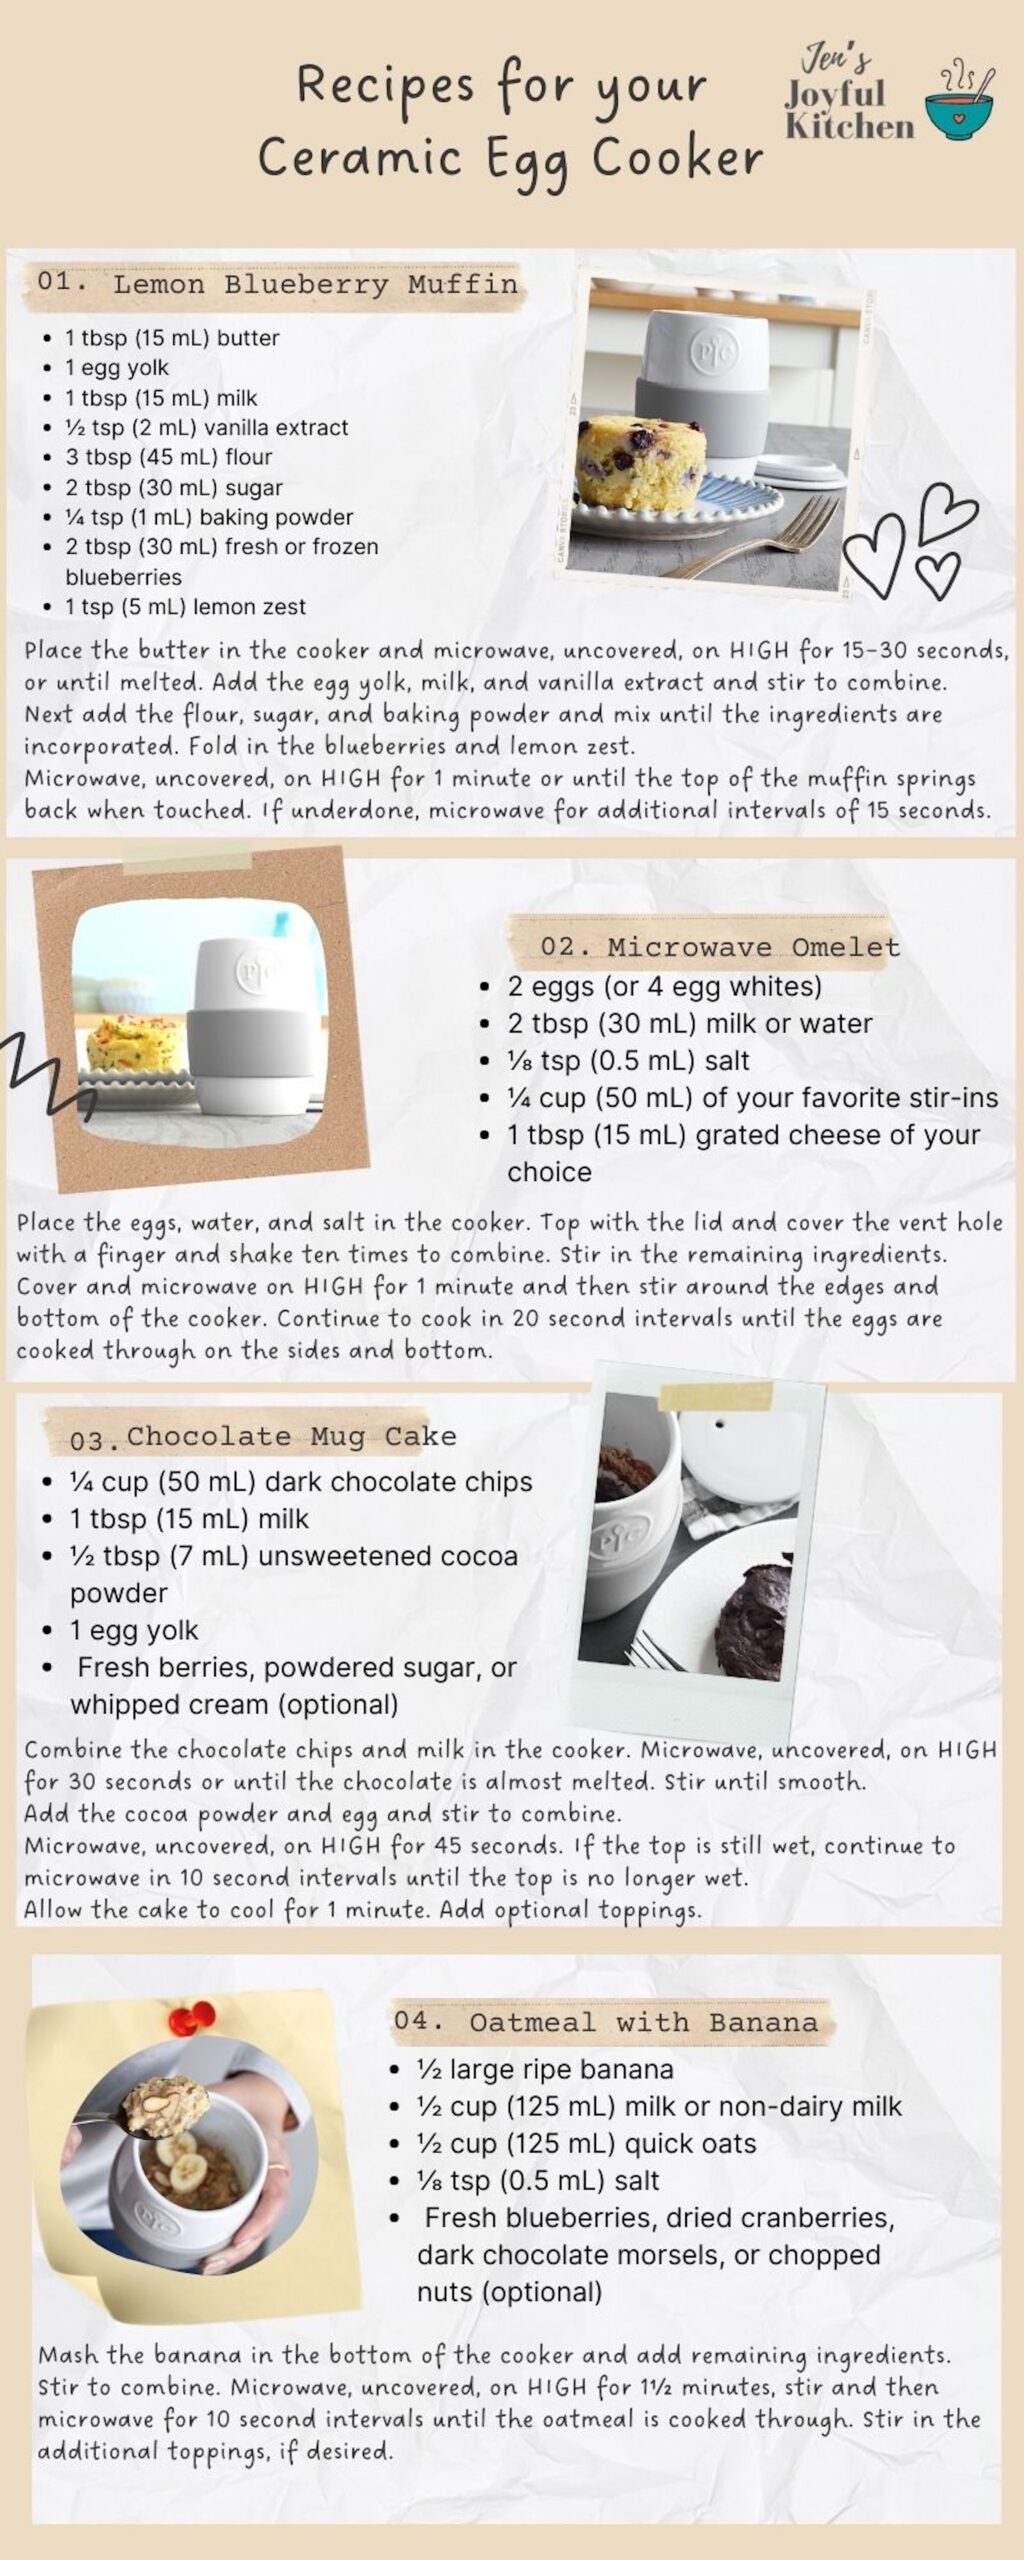 Book Reviews and More: Product Review - Microwave Egg Cooker - Pampered Chef